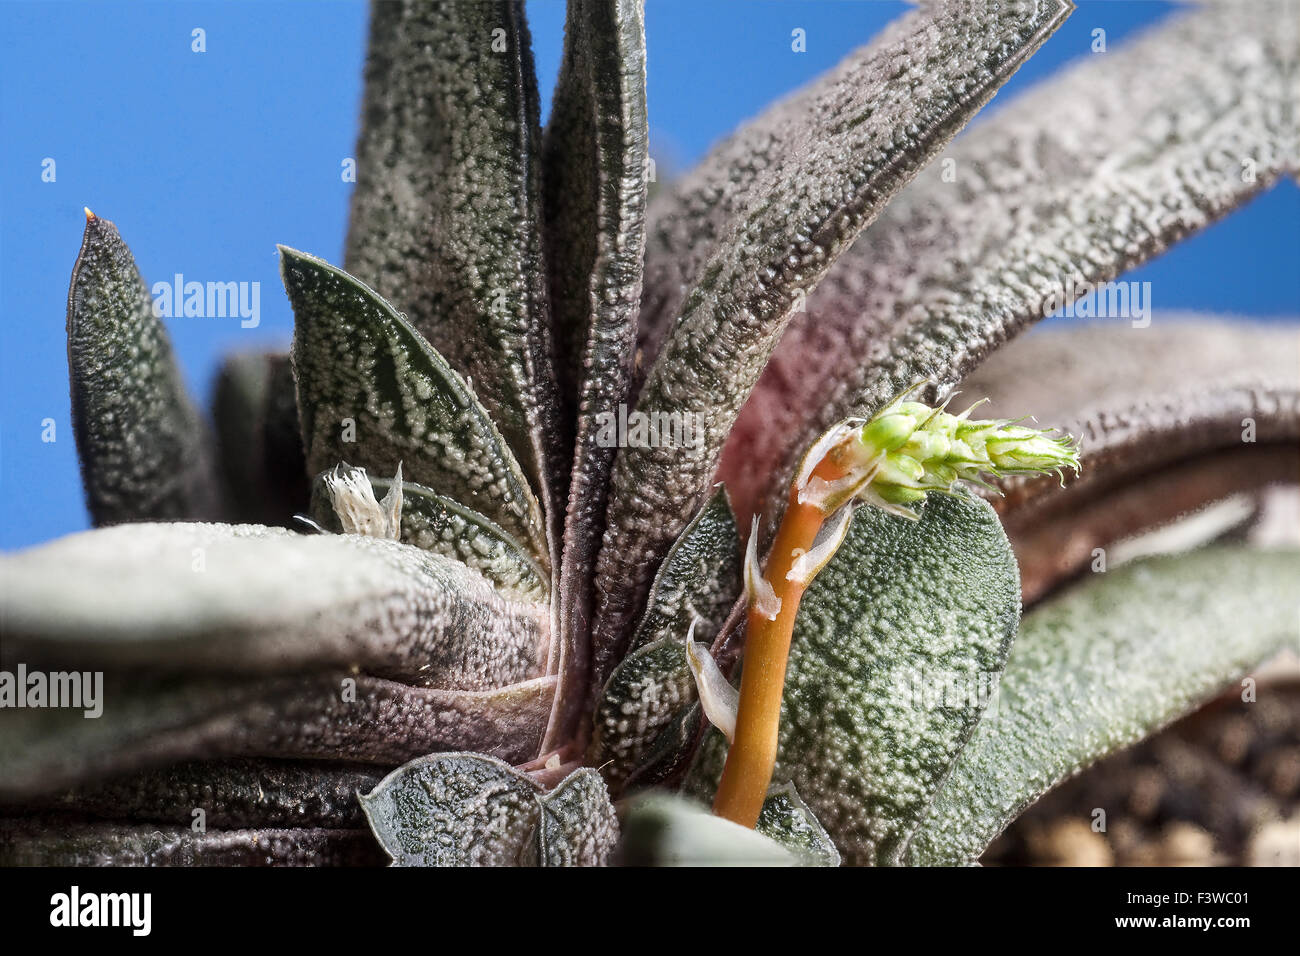 Gasteria baylissiana Rauh from South Africa Stock Photo